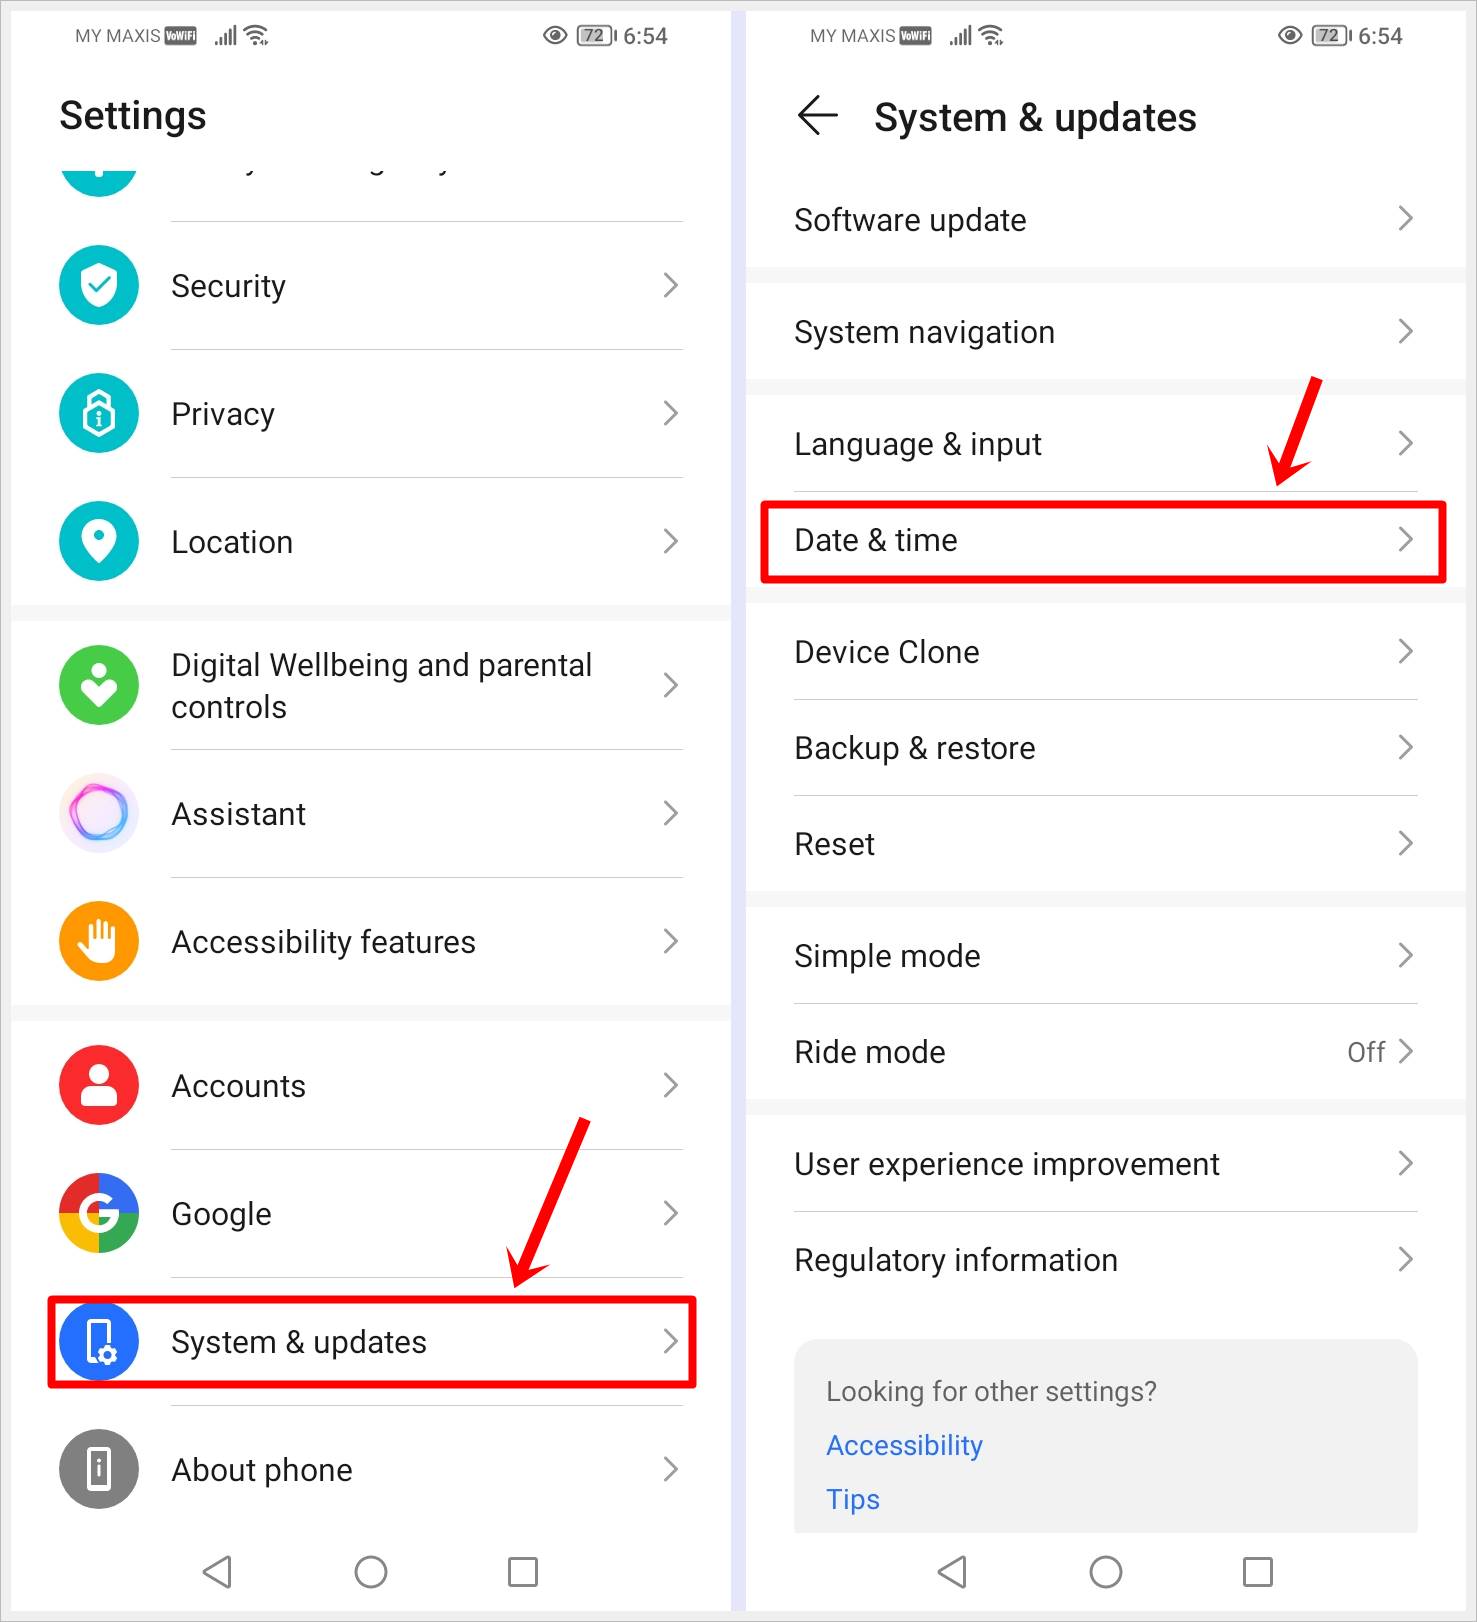 This image shows 2 screenshots: One shows the Android Settings menu with the "System & updates" option highlighted, the other shows the "System & updates" page with the "Date & time" option highligted.